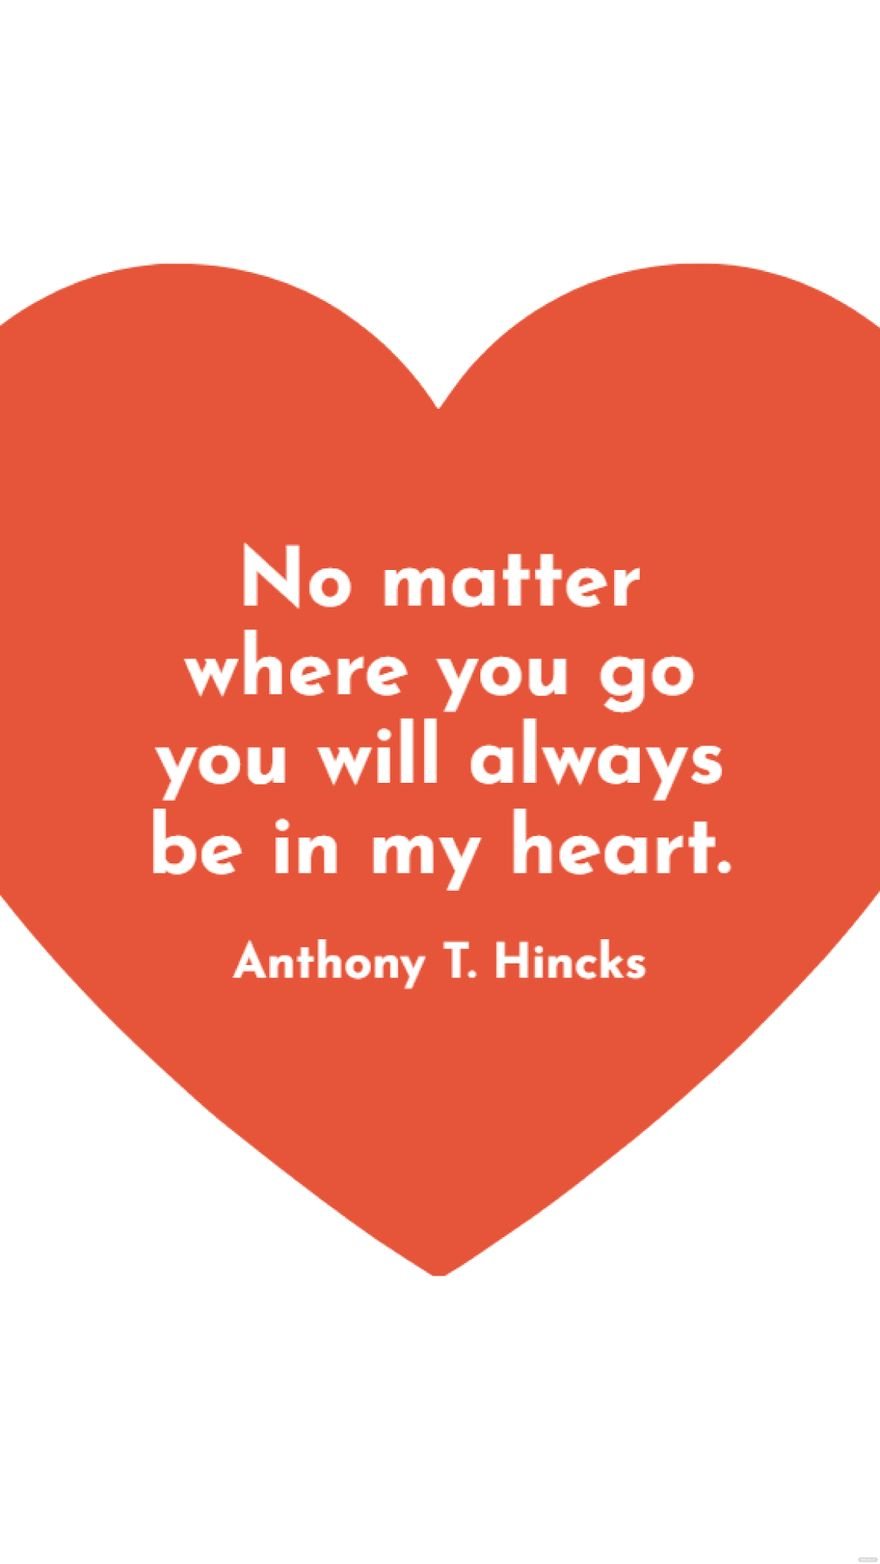 Free Anthony T. Hincks - No matter where you go you will always be in my heart. in JPG